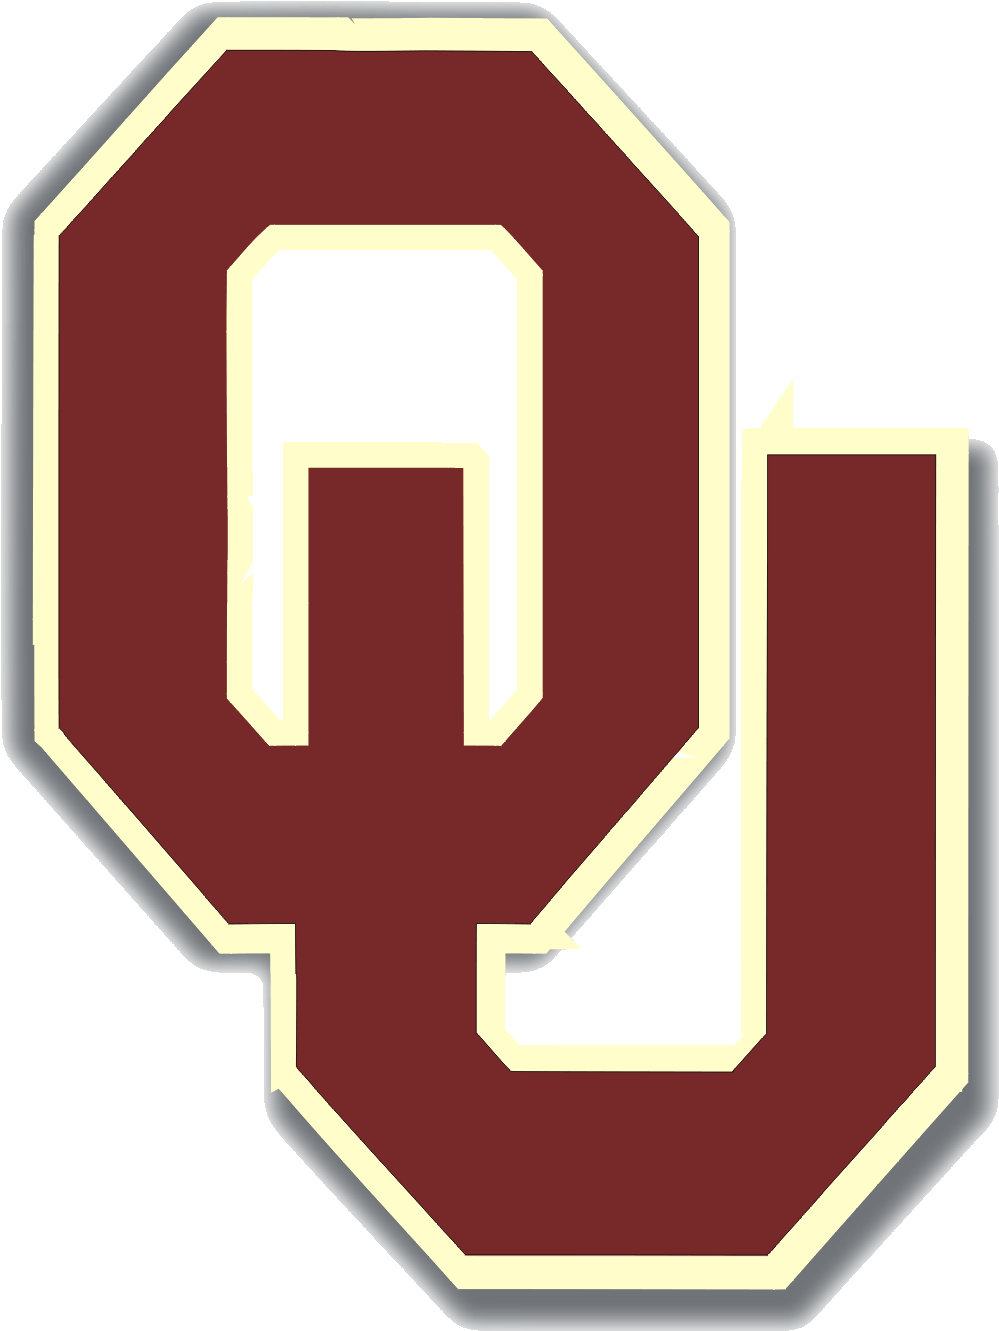 Free Division Sign In Word 2010 - Oklahoma University Logo Png (1027x1359)